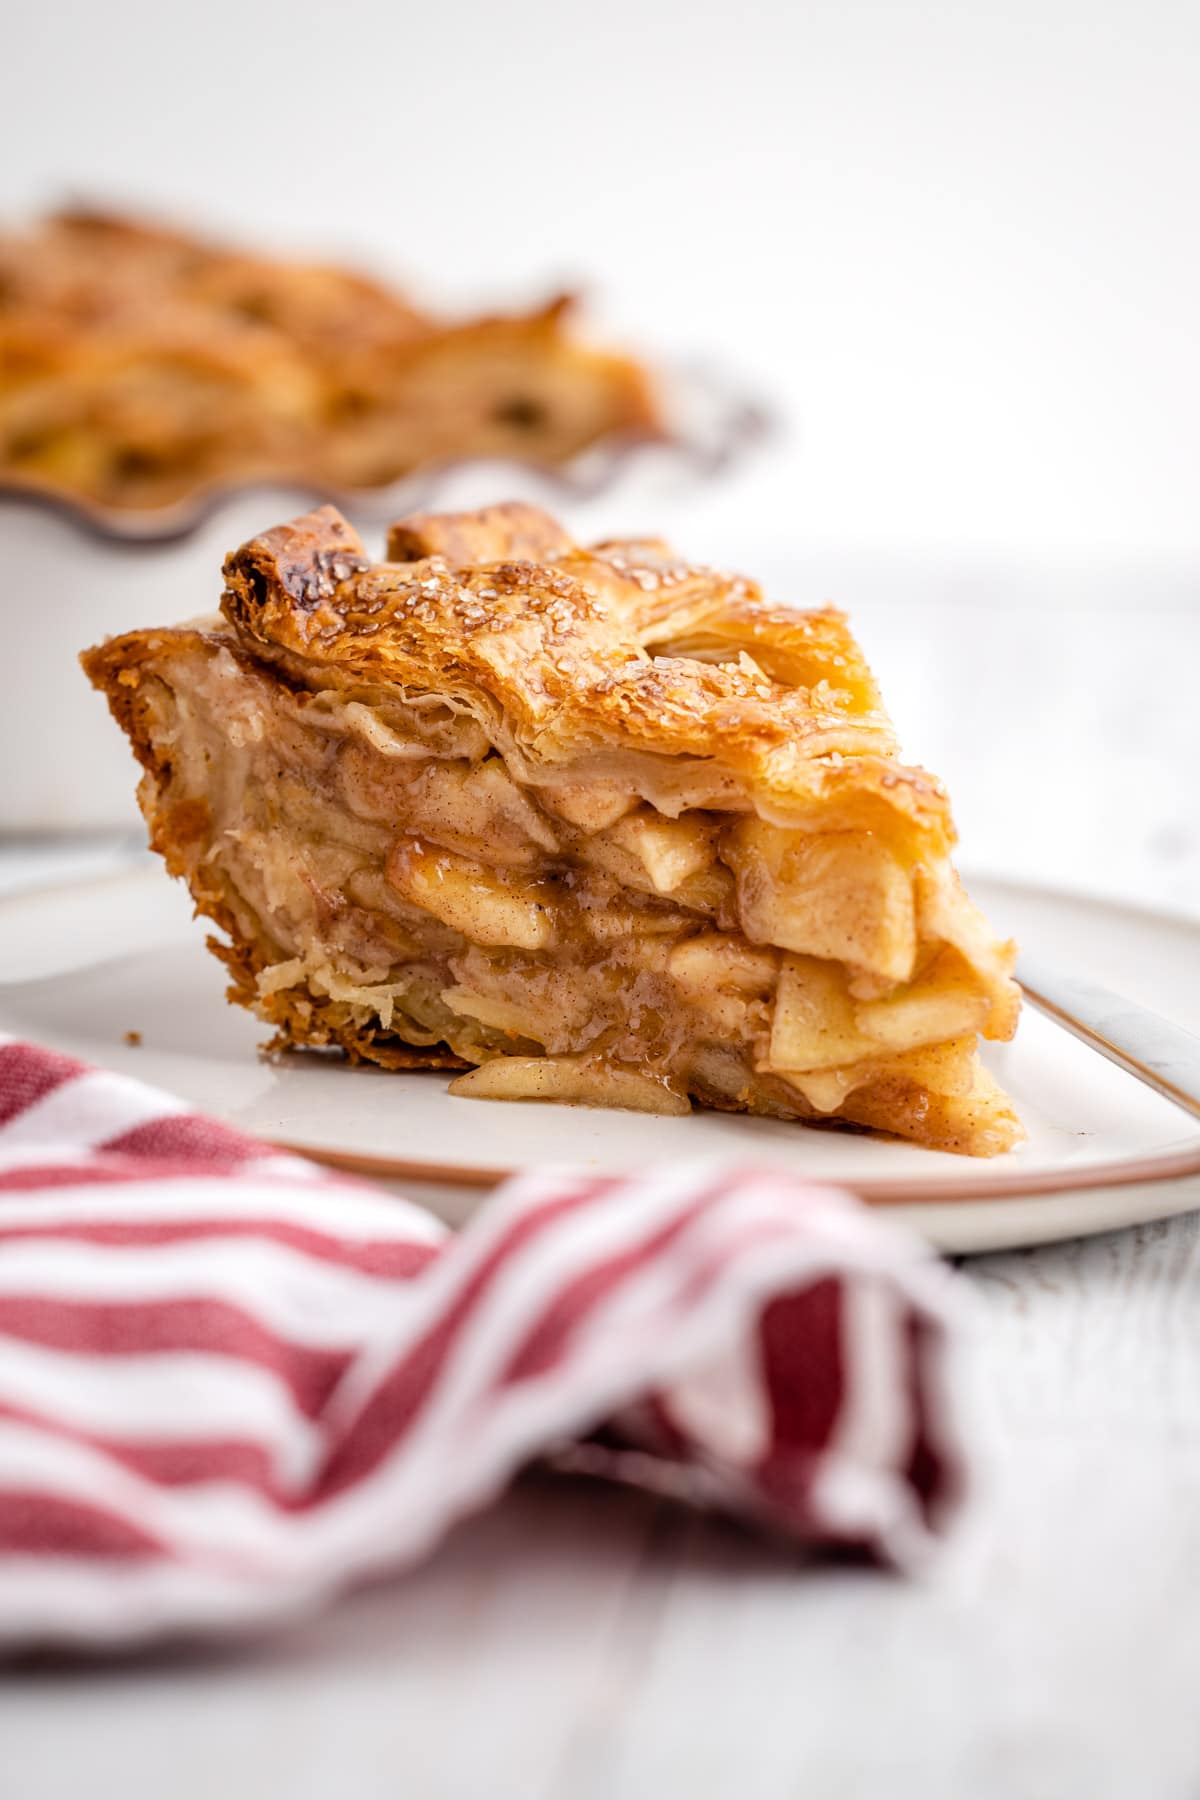 A slice of apple pie with flaky crust,